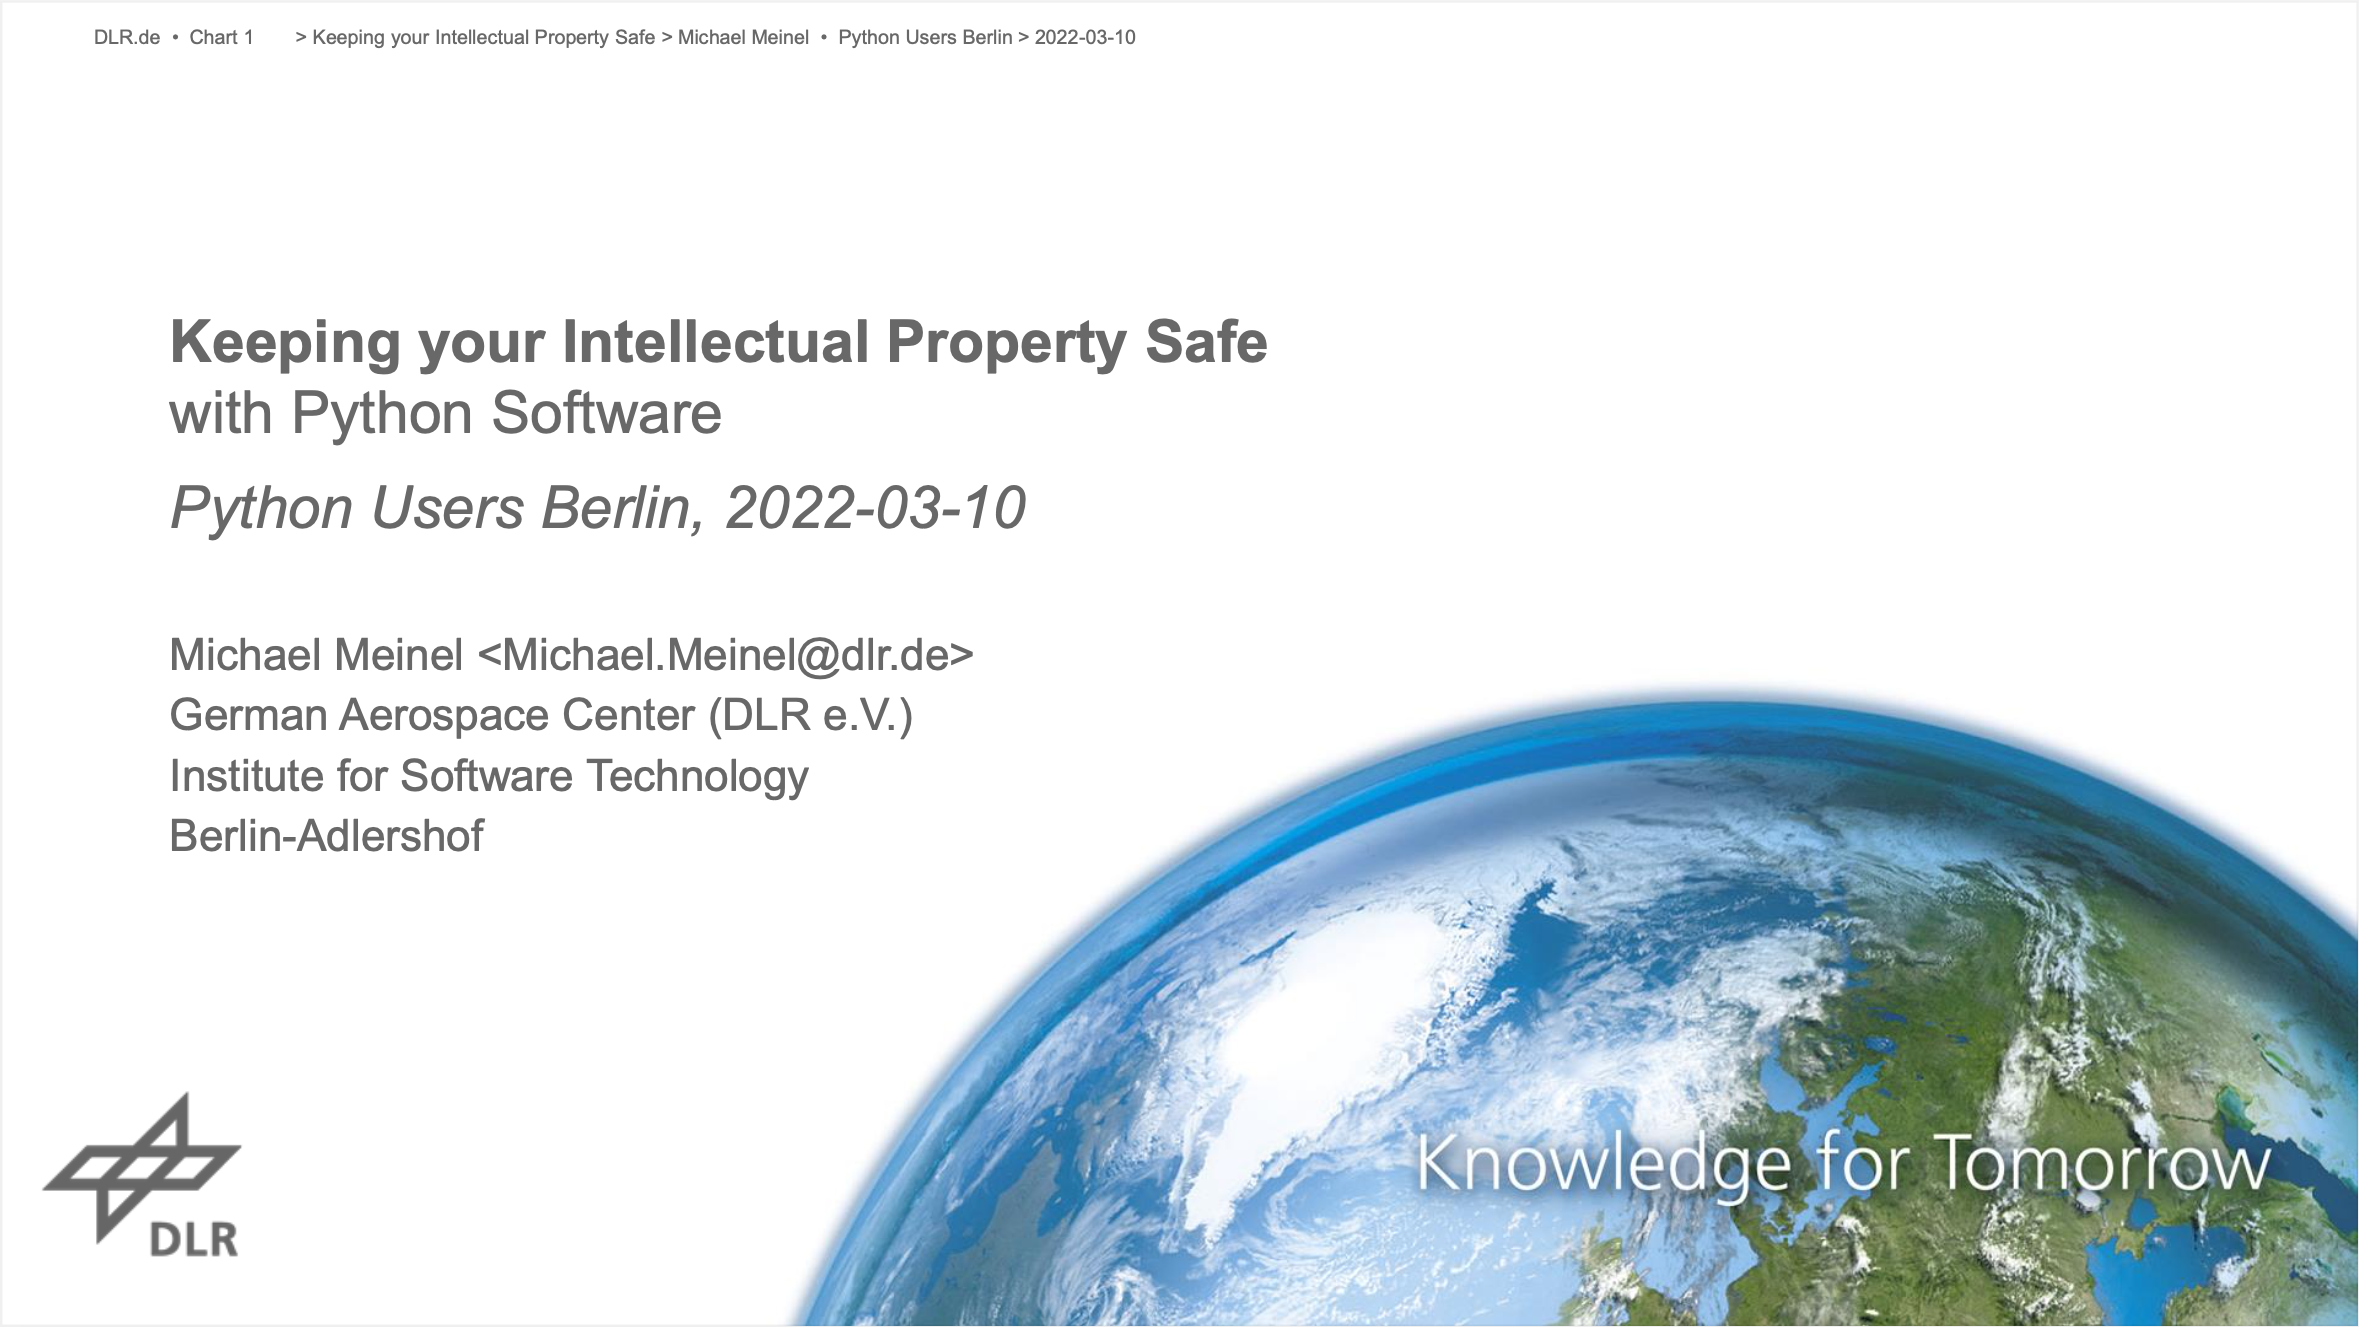 «Keeping your Intellectual Property Safe with Python Software» by Michael Meinel